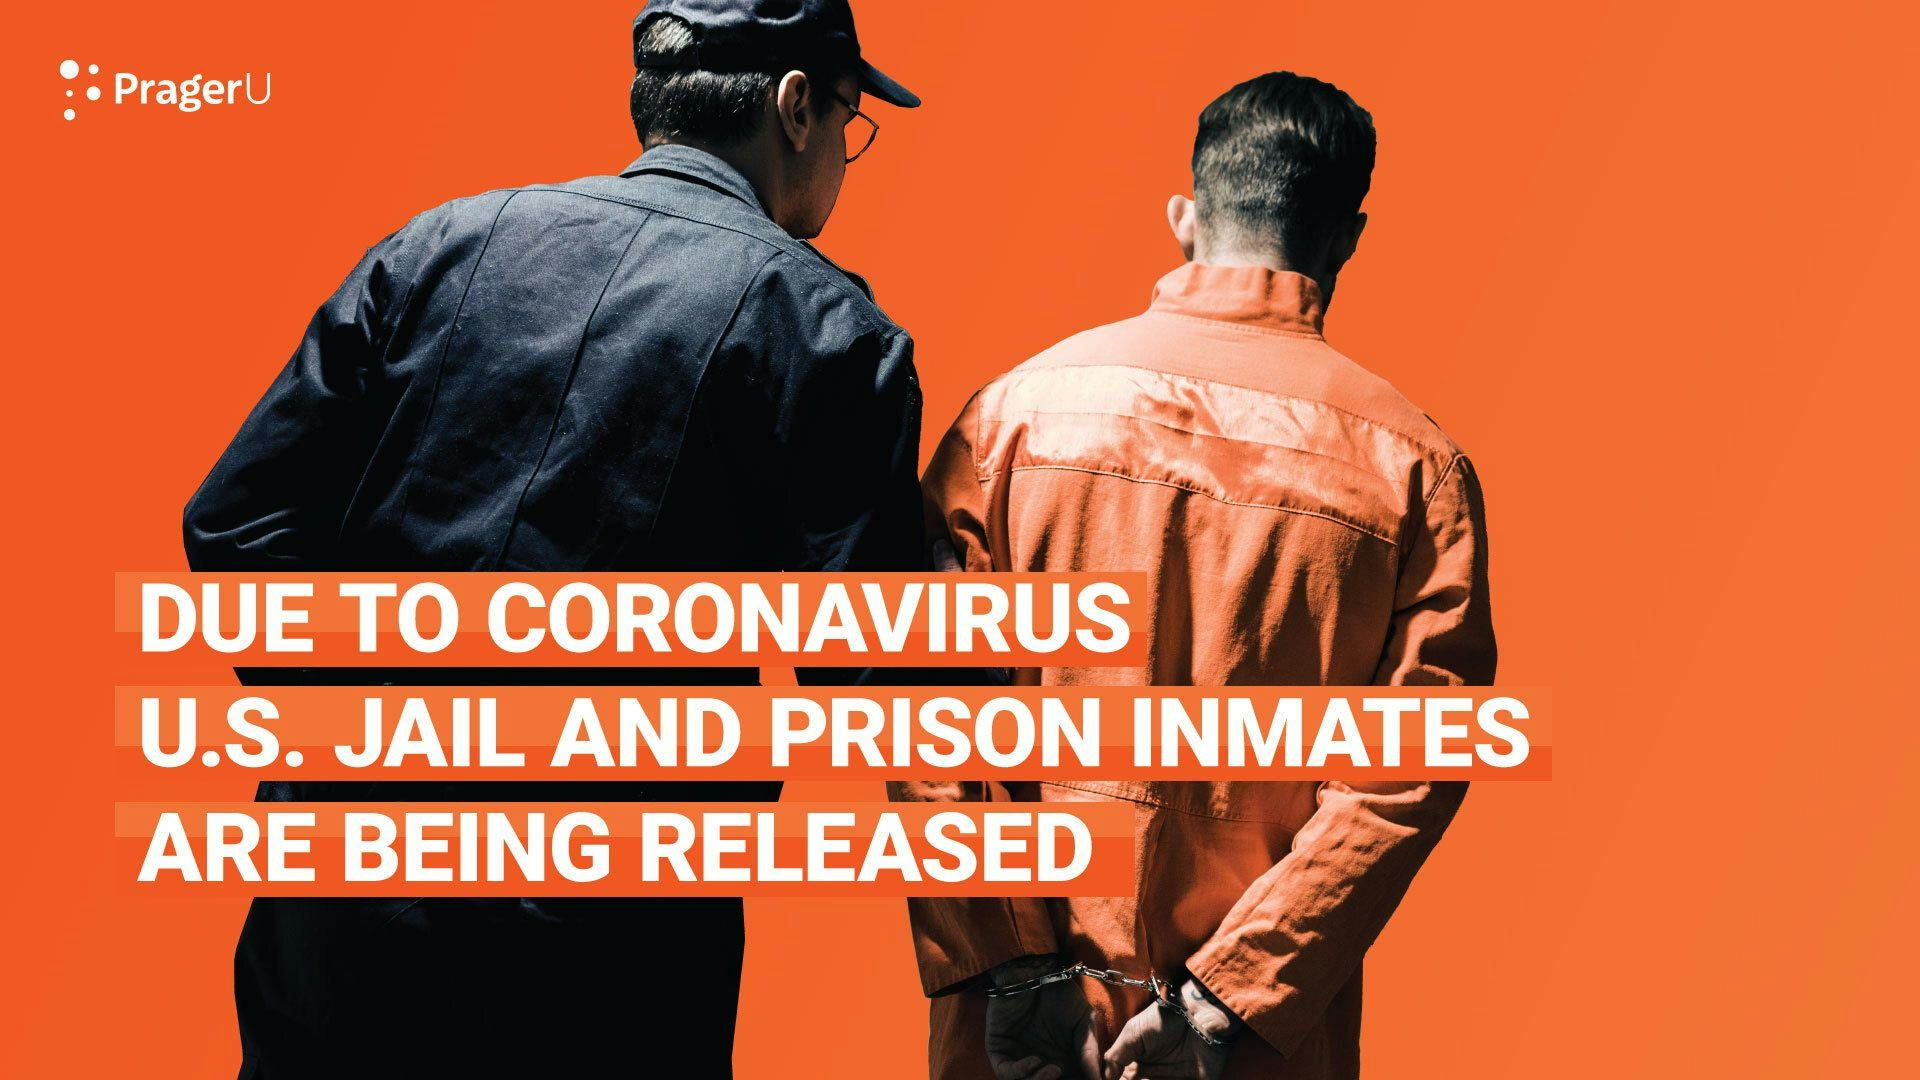 Due to Coronavirus U.S. Jail and Prison Inmates Are Being Released